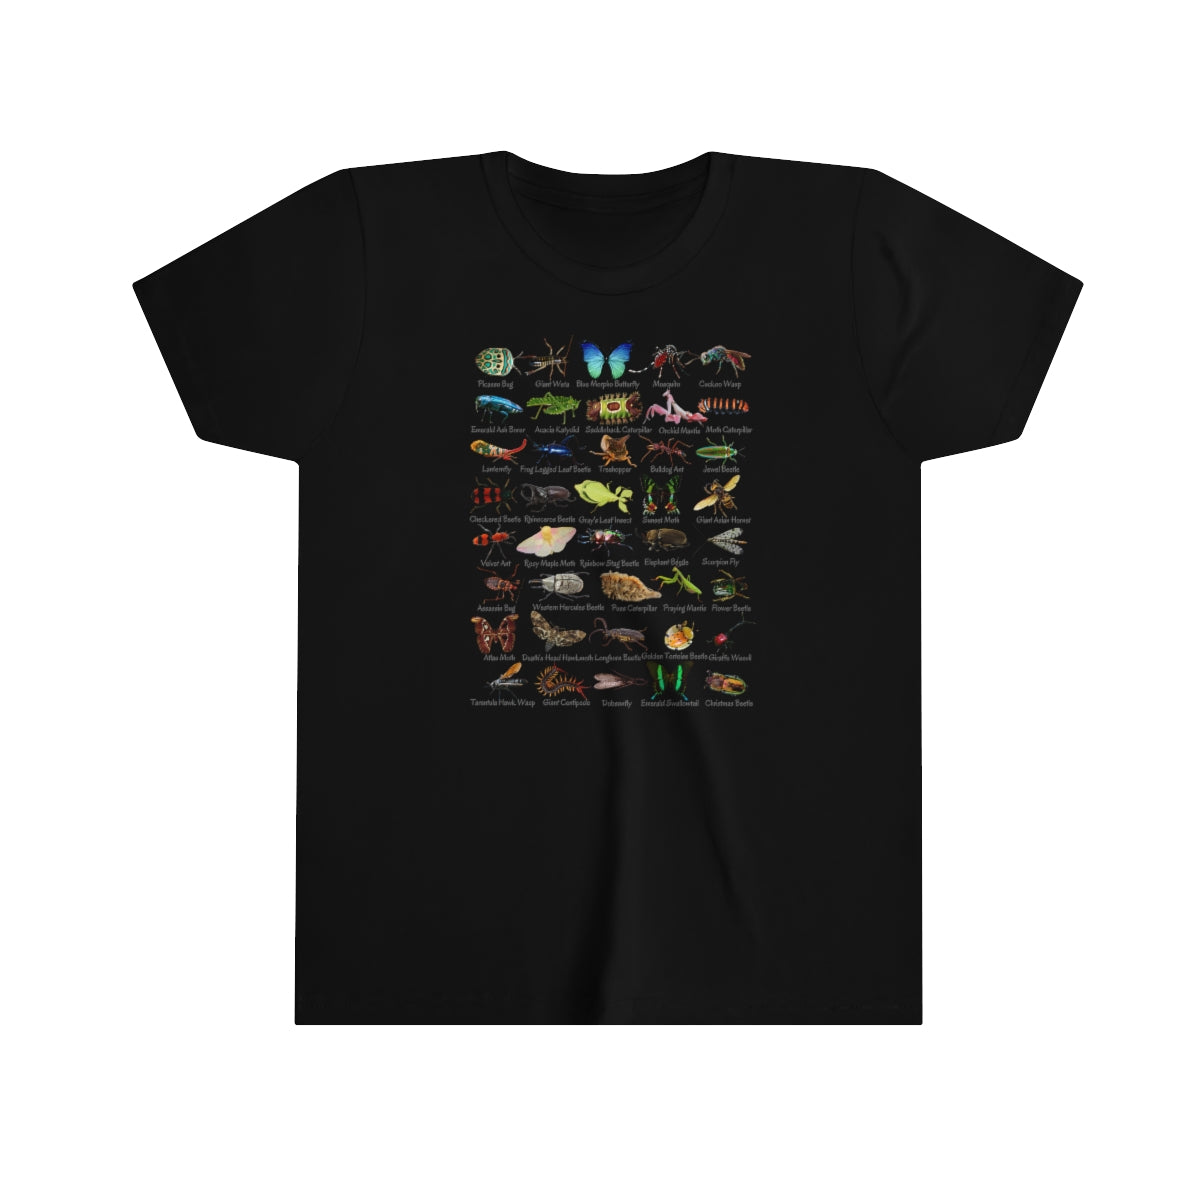 Impressive Insects Youth T-shirt